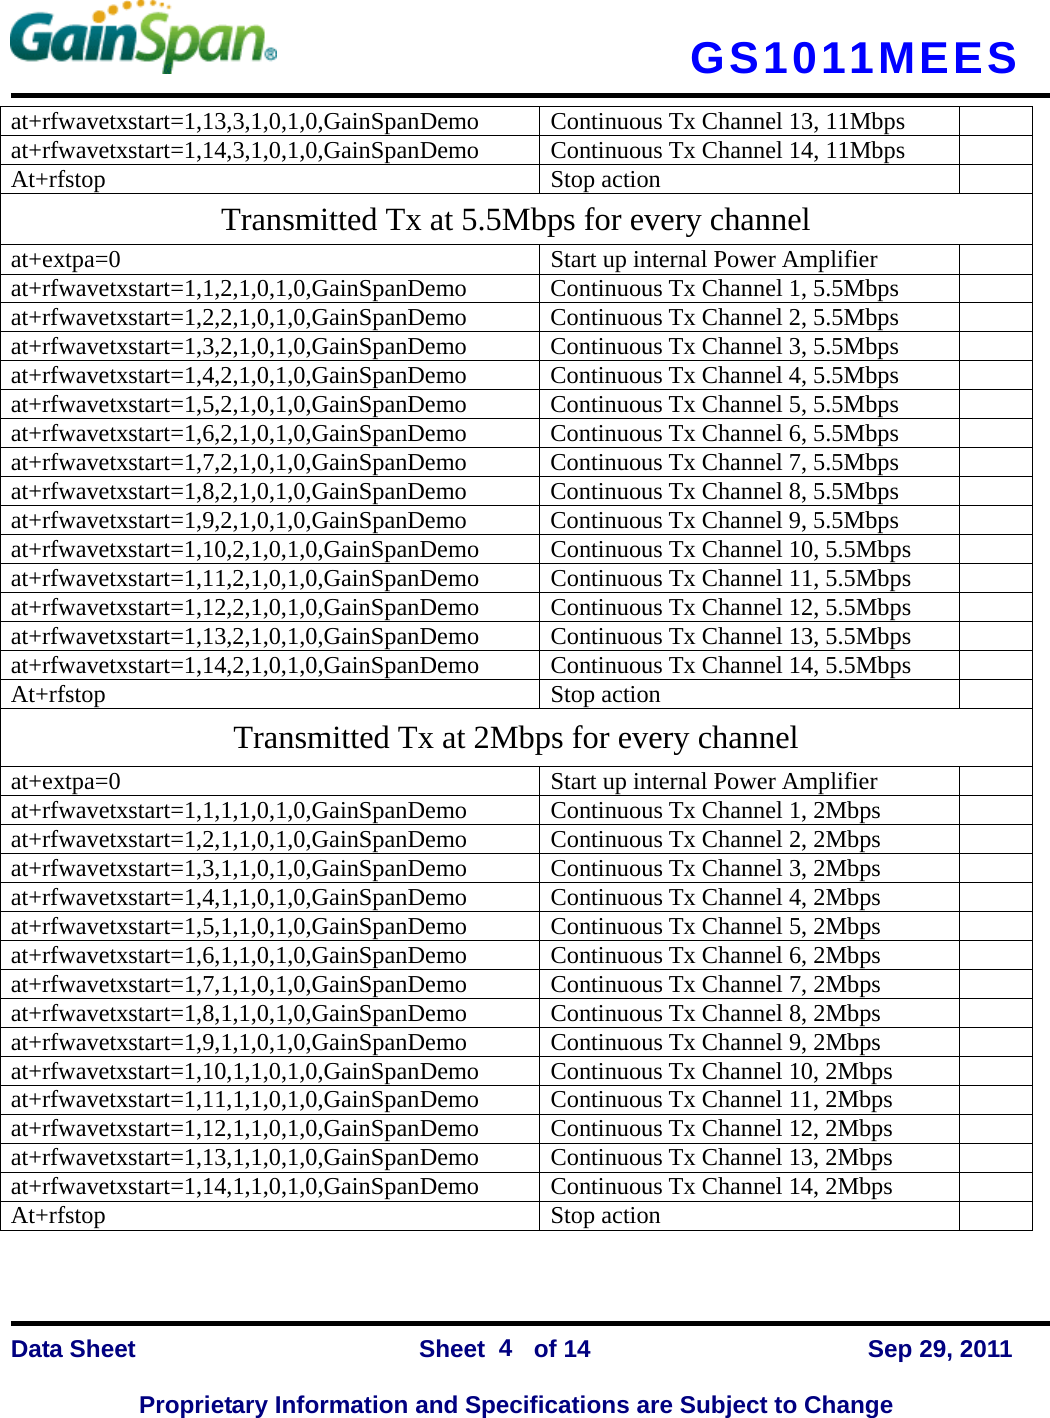   GS1011MEES    Data Sheet                Sheet    of 14      Sep 29, 2011  Proprietary Information and Specifications are Subject to Change 4 at+rfwavetxstart=1,13,3,1,0,1,0,GainSpanDemo  Continuous Tx Channel 13, 11Mbps   at+rfwavetxstart=1,14,3,1,0,1,0,GainSpanDemo  Continuous Tx Channel 14, 11Mbps   At+rfstop Stop action  Transmitted Tx at 5.5Mbps for every channel at+extpa=0  Start up internal Power Amplifier   at+rfwavetxstart=1,1,2,1,0,1,0,GainSpanDemo  Continuous Tx Channel 1, 5.5Mbps   at+rfwavetxstart=1,2,2,1,0,1,0,GainSpanDemo  Continuous Tx Channel 2, 5.5Mbps   at+rfwavetxstart=1,3,2,1,0,1,0,GainSpanDemo  Continuous Tx Channel 3, 5.5Mbps   at+rfwavetxstart=1,4,2,1,0,1,0,GainSpanDemo  Continuous Tx Channel 4, 5.5Mbps   at+rfwavetxstart=1,5,2,1,0,1,0,GainSpanDemo  Continuous Tx Channel 5, 5.5Mbps   at+rfwavetxstart=1,6,2,1,0,1,0,GainSpanDemo  Continuous Tx Channel 6, 5.5Mbps   at+rfwavetxstart=1,7,2,1,0,1,0,GainSpanDemo  Continuous Tx Channel 7, 5.5Mbps   at+rfwavetxstart=1,8,2,1,0,1,0,GainSpanDemo  Continuous Tx Channel 8, 5.5Mbps   at+rfwavetxstart=1,9,2,1,0,1,0,GainSpanDemo  Continuous Tx Channel 9, 5.5Mbps   at+rfwavetxstart=1,10,2,1,0,1,0,GainSpanDemo  Continuous Tx Channel 10, 5.5Mbps   at+rfwavetxstart=1,11,2,1,0,1,0,GainSpanDemo  Continuous Tx Channel 11, 5.5Mbps   at+rfwavetxstart=1,12,2,1,0,1,0,GainSpanDemo  Continuous Tx Channel 12, 5.5Mbps   at+rfwavetxstart=1,13,2,1,0,1,0,GainSpanDemo  Continuous Tx Channel 13, 5.5Mbps   at+rfwavetxstart=1,14,2,1,0,1,0,GainSpanDemo  Continuous Tx Channel 14, 5.5Mbps   At+rfstop Stop action  Transmitted Tx at 2Mbps for every channel at+extpa=0  Start up internal Power Amplifier   at+rfwavetxstart=1,1,1,1,0,1,0,GainSpanDemo  Continuous Tx Channel 1, 2Mbps   at+rfwavetxstart=1,2,1,1,0,1,0,GainSpanDemo  Continuous Tx Channel 2, 2Mbps   at+rfwavetxstart=1,3,1,1,0,1,0,GainSpanDemo  Continuous Tx Channel 3, 2Mbps   at+rfwavetxstart=1,4,1,1,0,1,0,GainSpanDemo  Continuous Tx Channel 4, 2Mbps   at+rfwavetxstart=1,5,1,1,0,1,0,GainSpanDemo  Continuous Tx Channel 5, 2Mbps   at+rfwavetxstart=1,6,1,1,0,1,0,GainSpanDemo  Continuous Tx Channel 6, 2Mbps   at+rfwavetxstart=1,7,1,1,0,1,0,GainSpanDemo  Continuous Tx Channel 7, 2Mbps   at+rfwavetxstart=1,8,1,1,0,1,0,GainSpanDemo  Continuous Tx Channel 8, 2Mbps   at+rfwavetxstart=1,9,1,1,0,1,0,GainSpanDemo  Continuous Tx Channel 9, 2Mbps   at+rfwavetxstart=1,10,1,1,0,1,0,GainSpanDemo  Continuous Tx Channel 10, 2Mbps   at+rfwavetxstart=1,11,1,1,0,1,0,GainSpanDemo  Continuous Tx Channel 11, 2Mbps   at+rfwavetxstart=1,12,1,1,0,1,0,GainSpanDemo  Continuous Tx Channel 12, 2Mbps   at+rfwavetxstart=1,13,1,1,0,1,0,GainSpanDemo  Continuous Tx Channel 13, 2Mbps   at+rfwavetxstart=1,14,1,1,0,1,0,GainSpanDemo  Continuous Tx Channel 14, 2Mbps   At+rfstop Stop action  